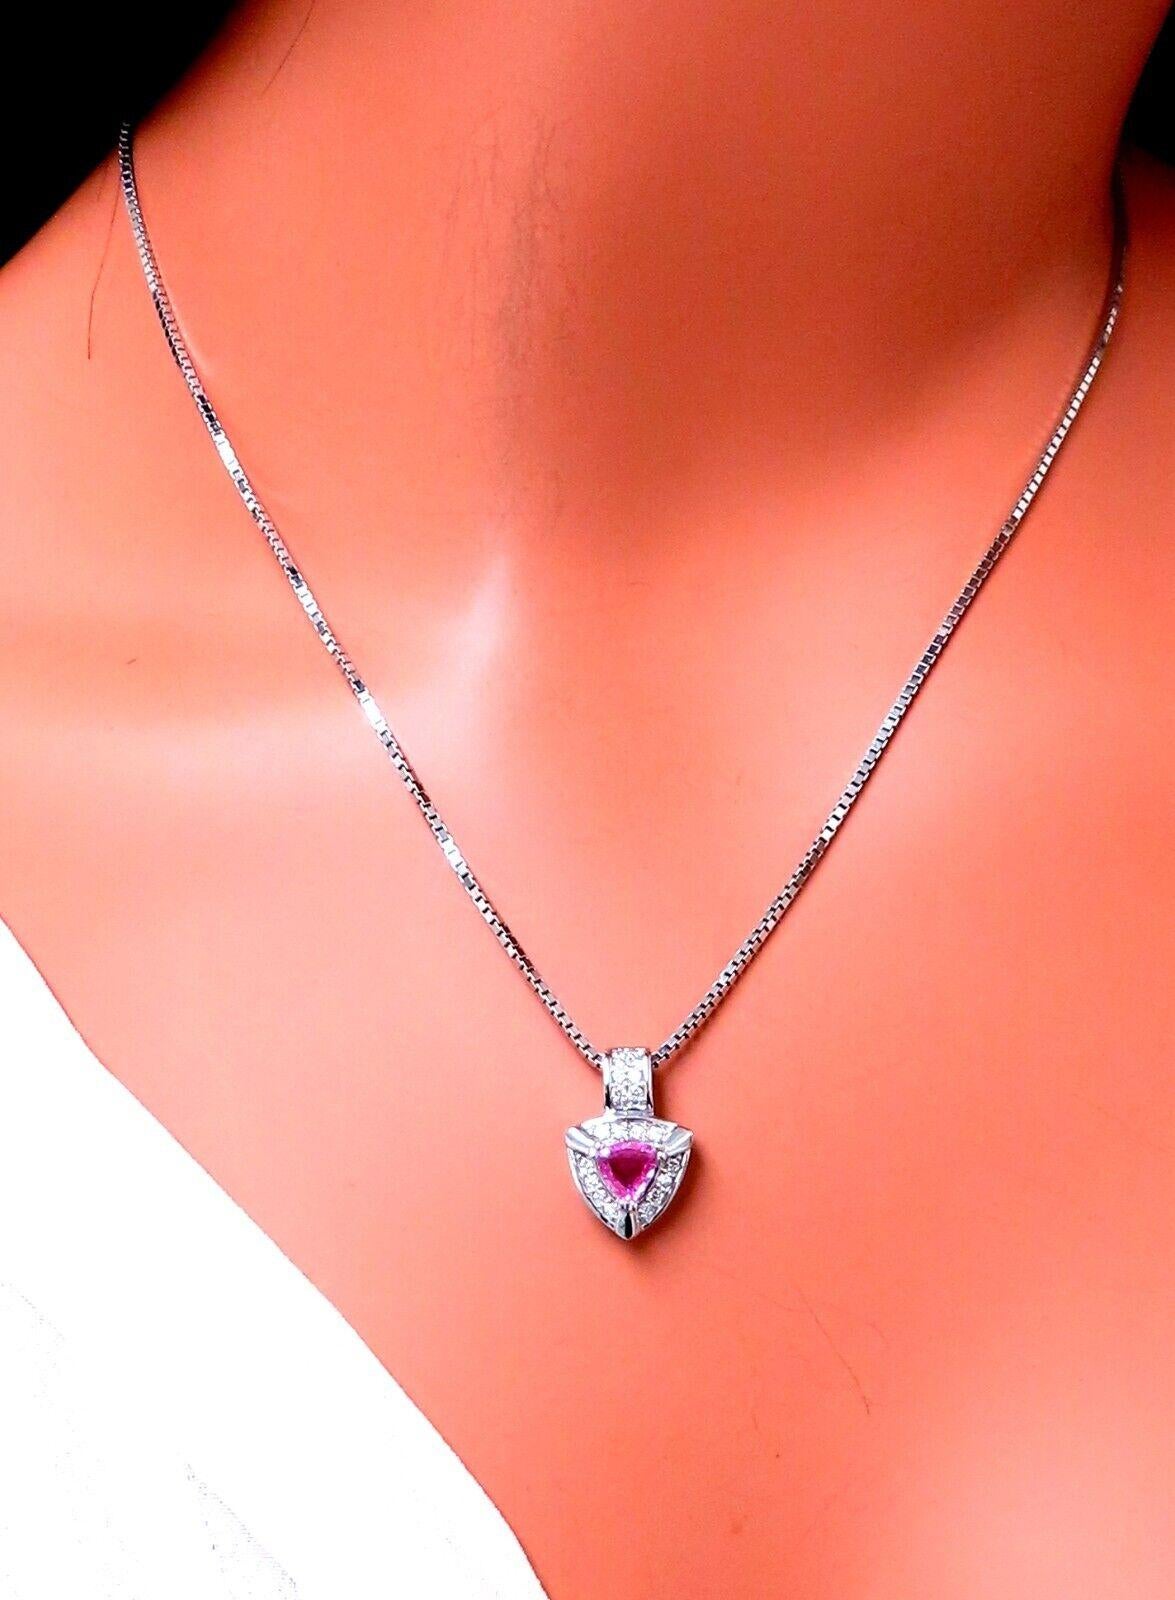 .76ct Natural Pink Sapphire necklace.

5x5 mm


.40ct natural round diamonds

G color, Vs2 Clarity

14 karat white gold

18 inch necklace


Pendant measures 18 x 12 mm

9 grams